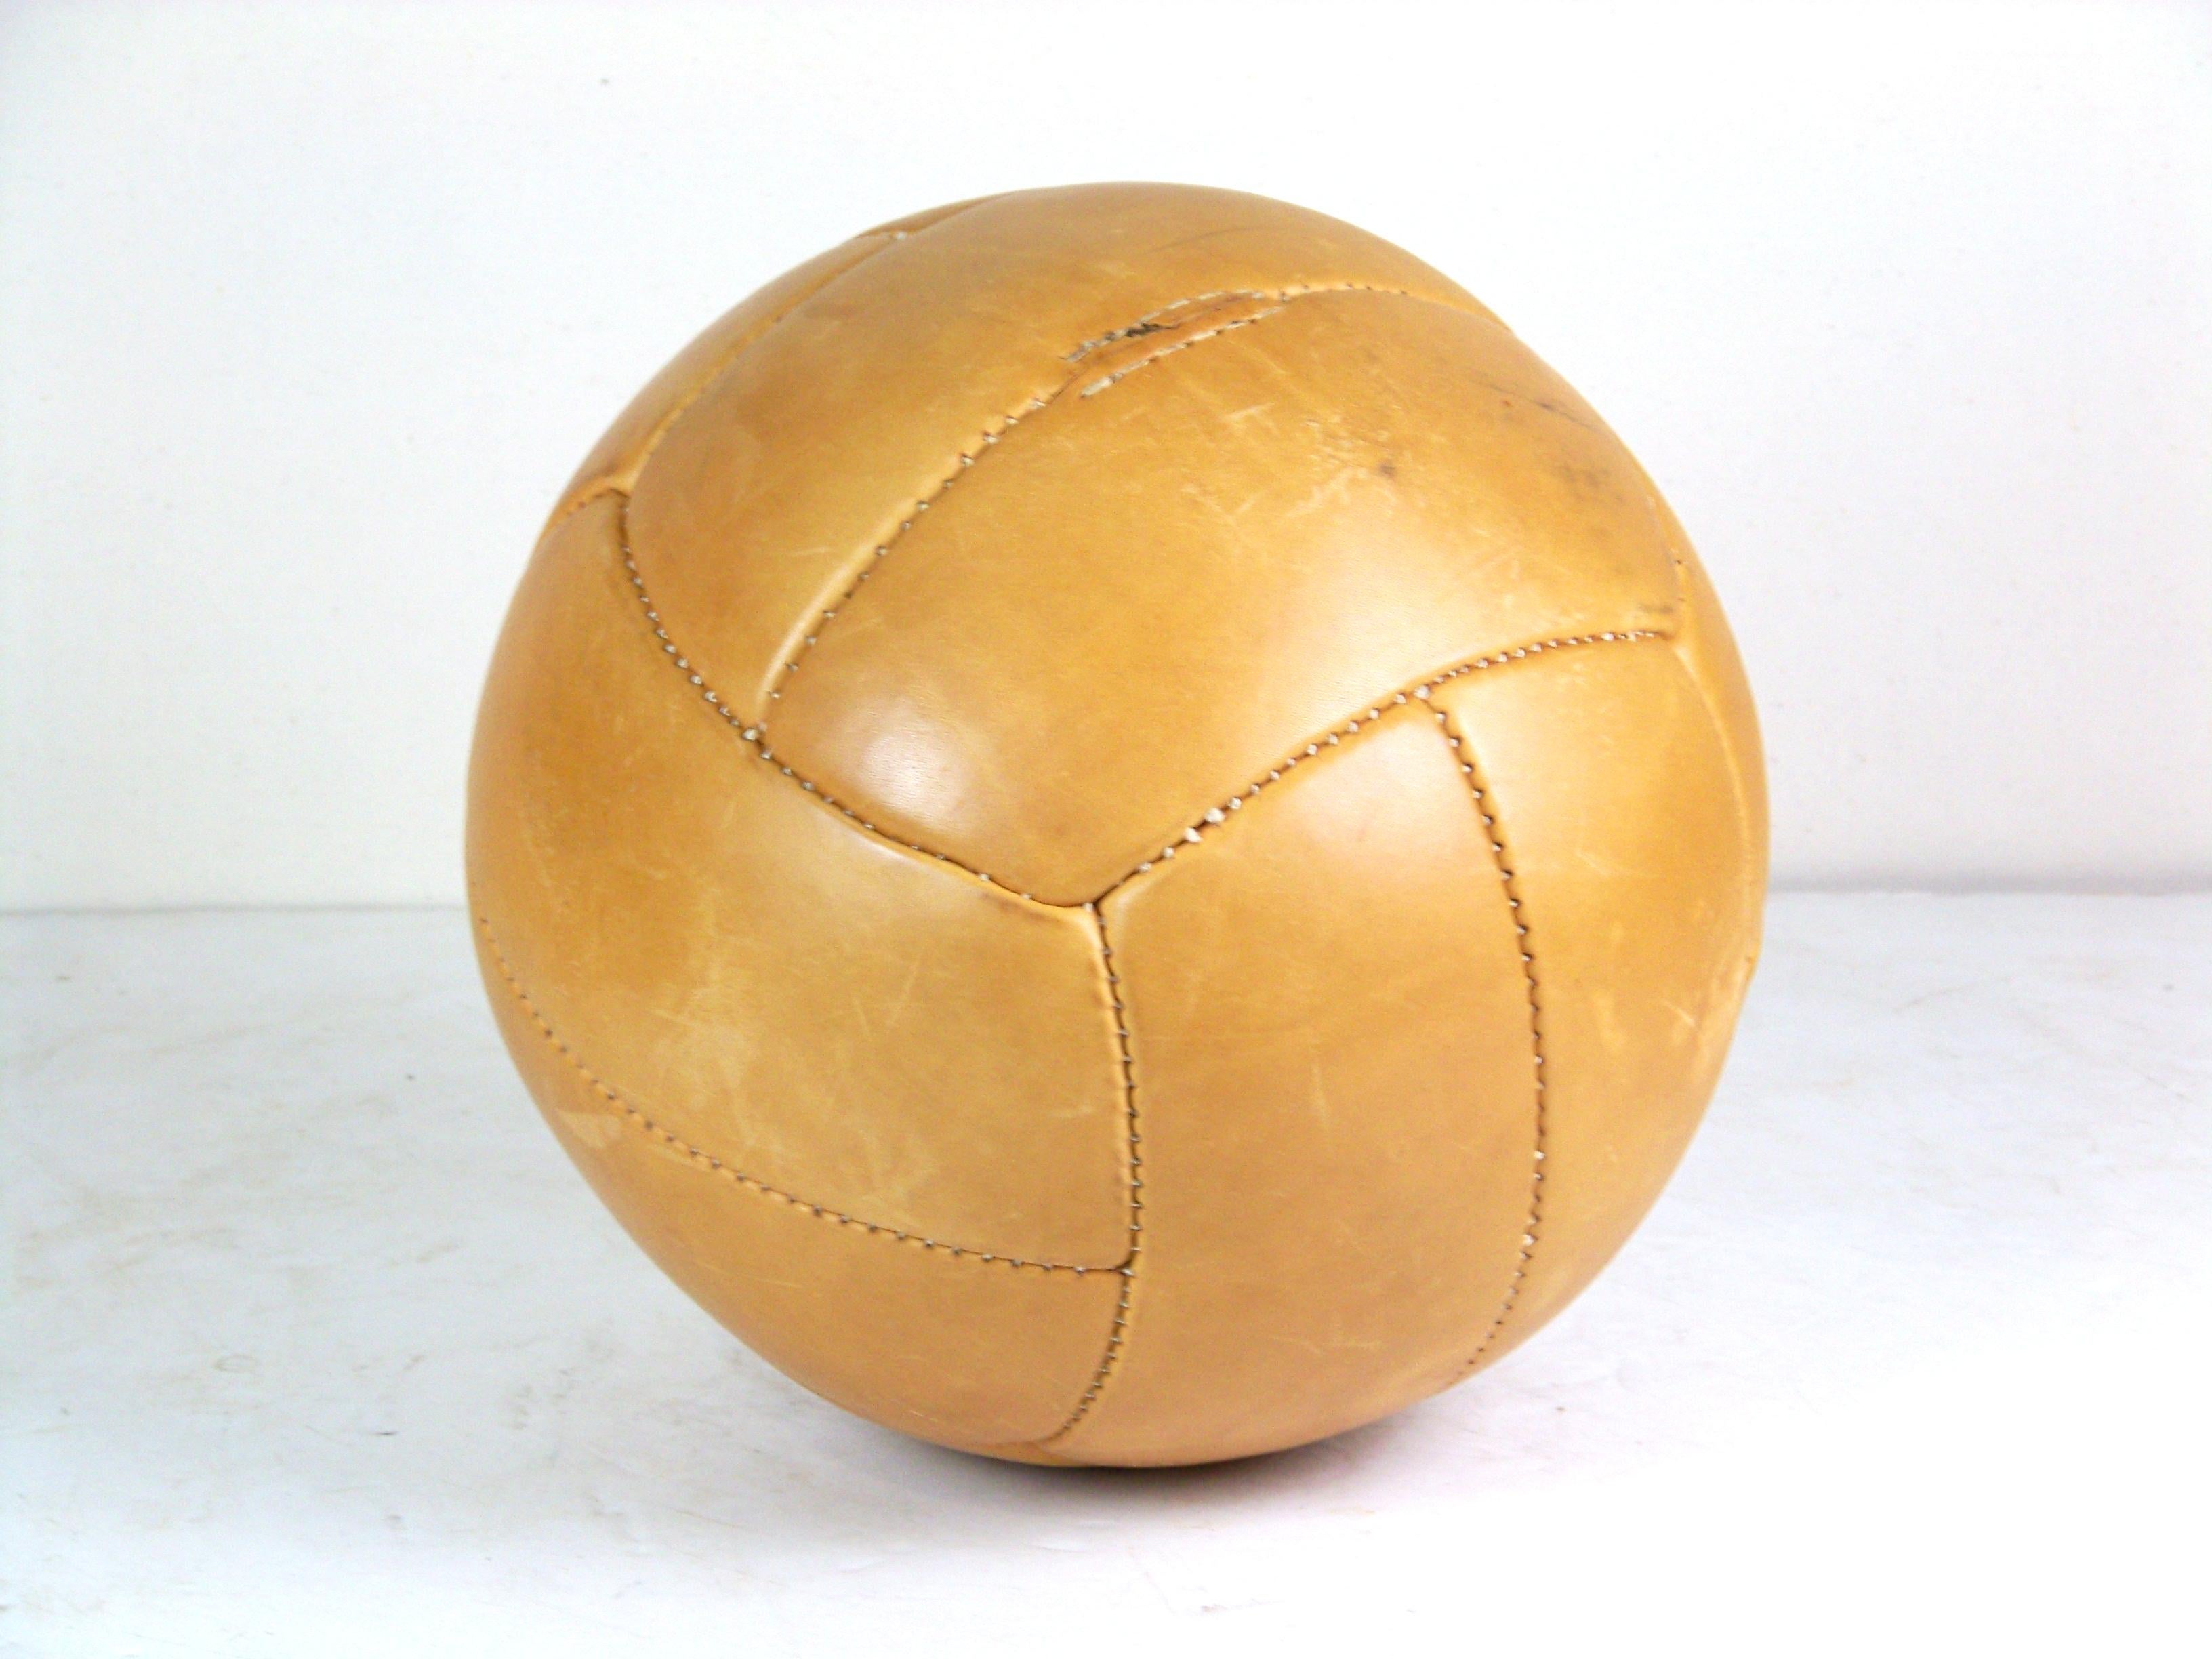  It can be used as an original interior accessory, small stool or as a stylish training aid. The leather cover is original condition, the ball has never been used!